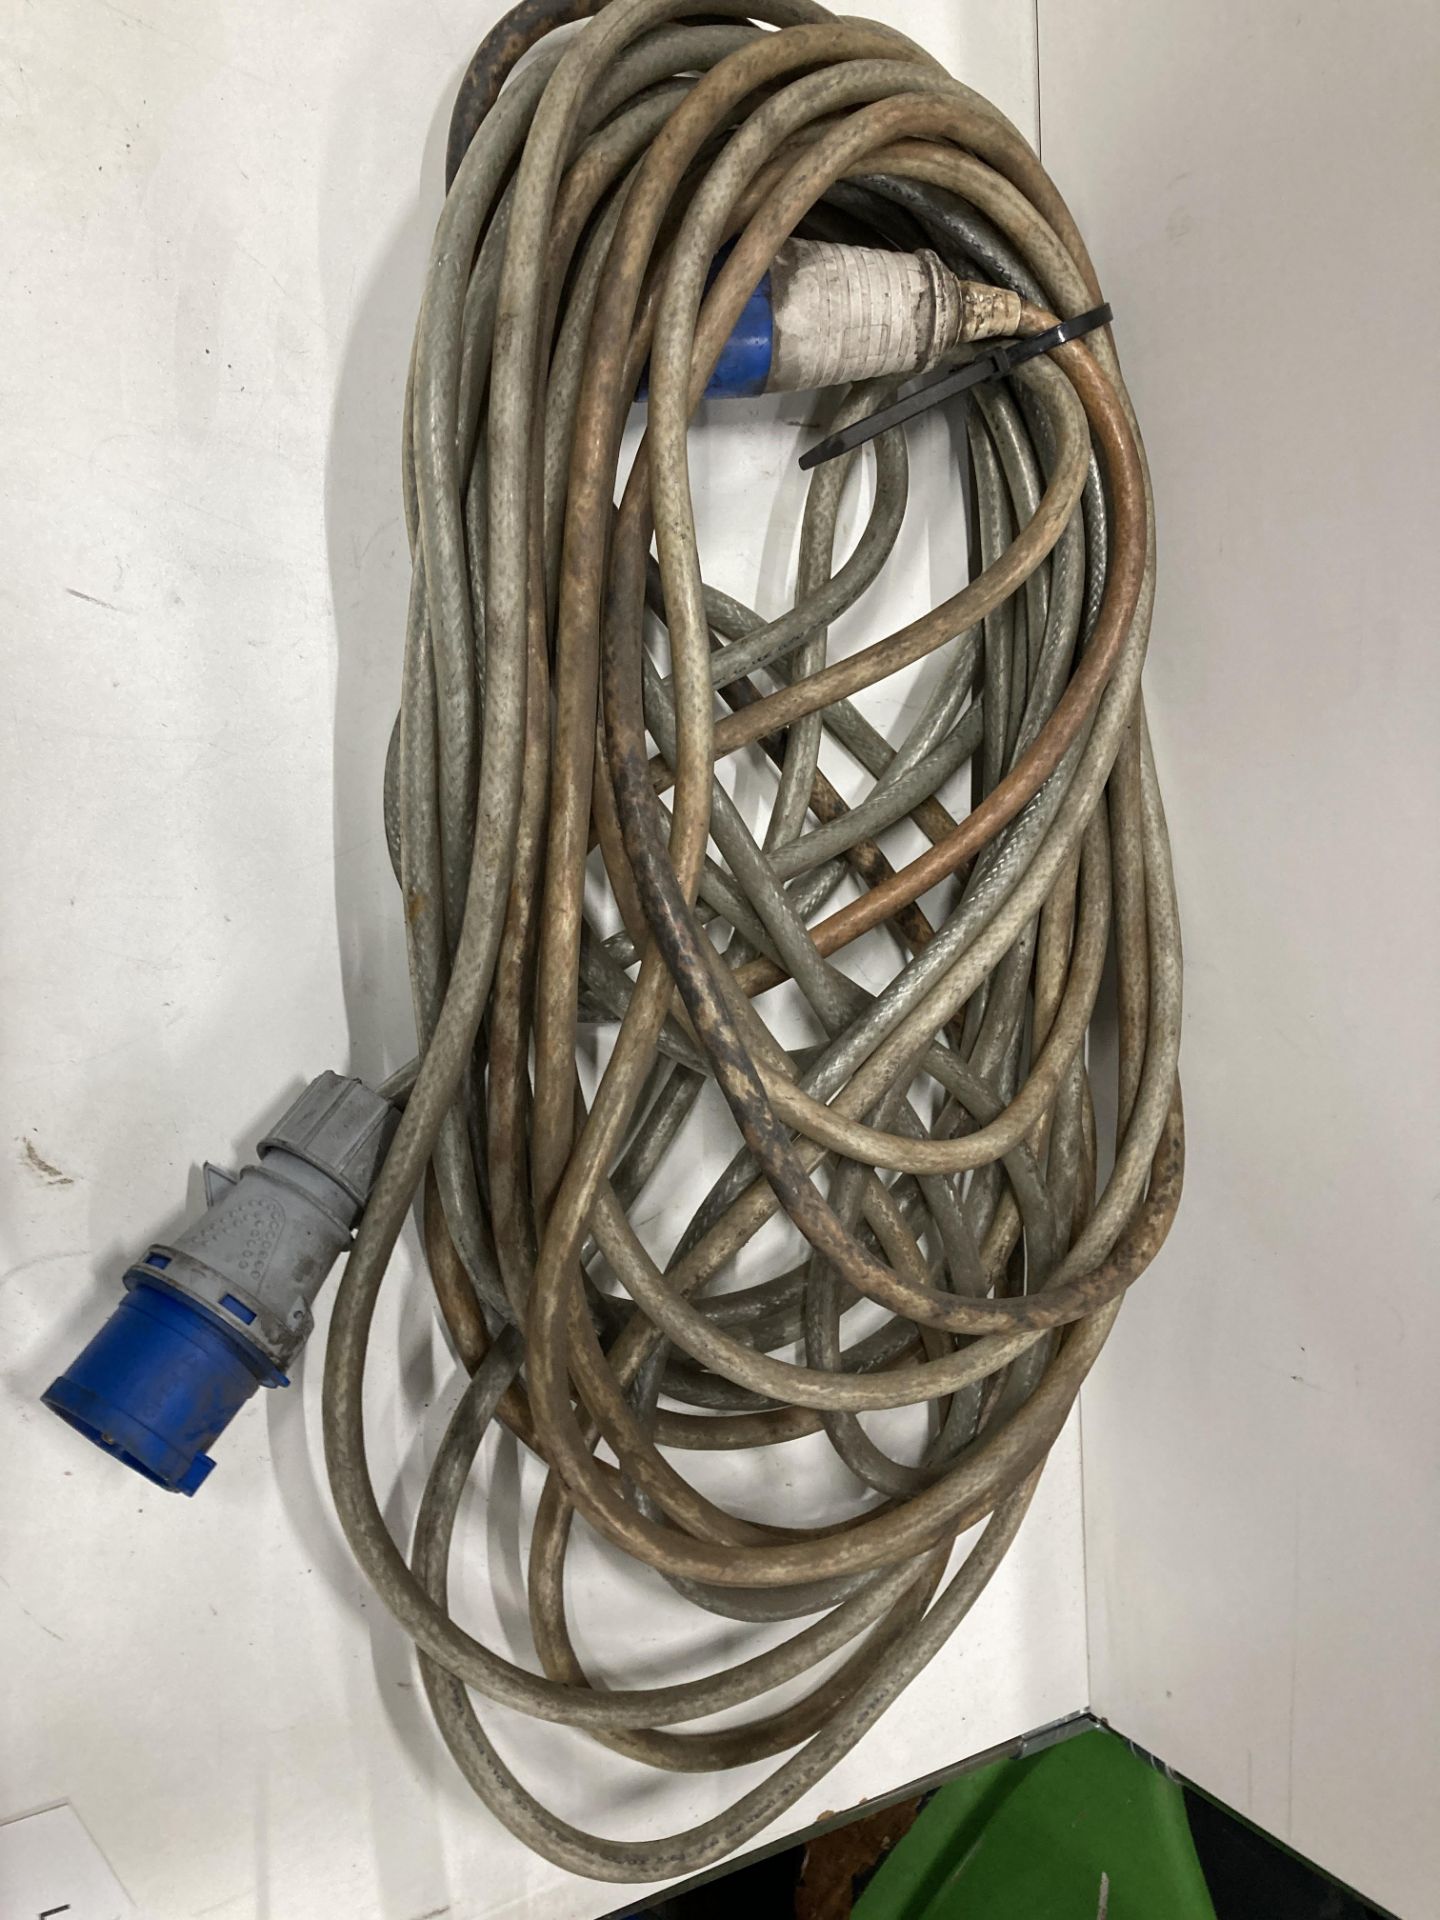 4 x Various 240v Extension/Adaptor Cables - As Pictured - Image 3 of 10